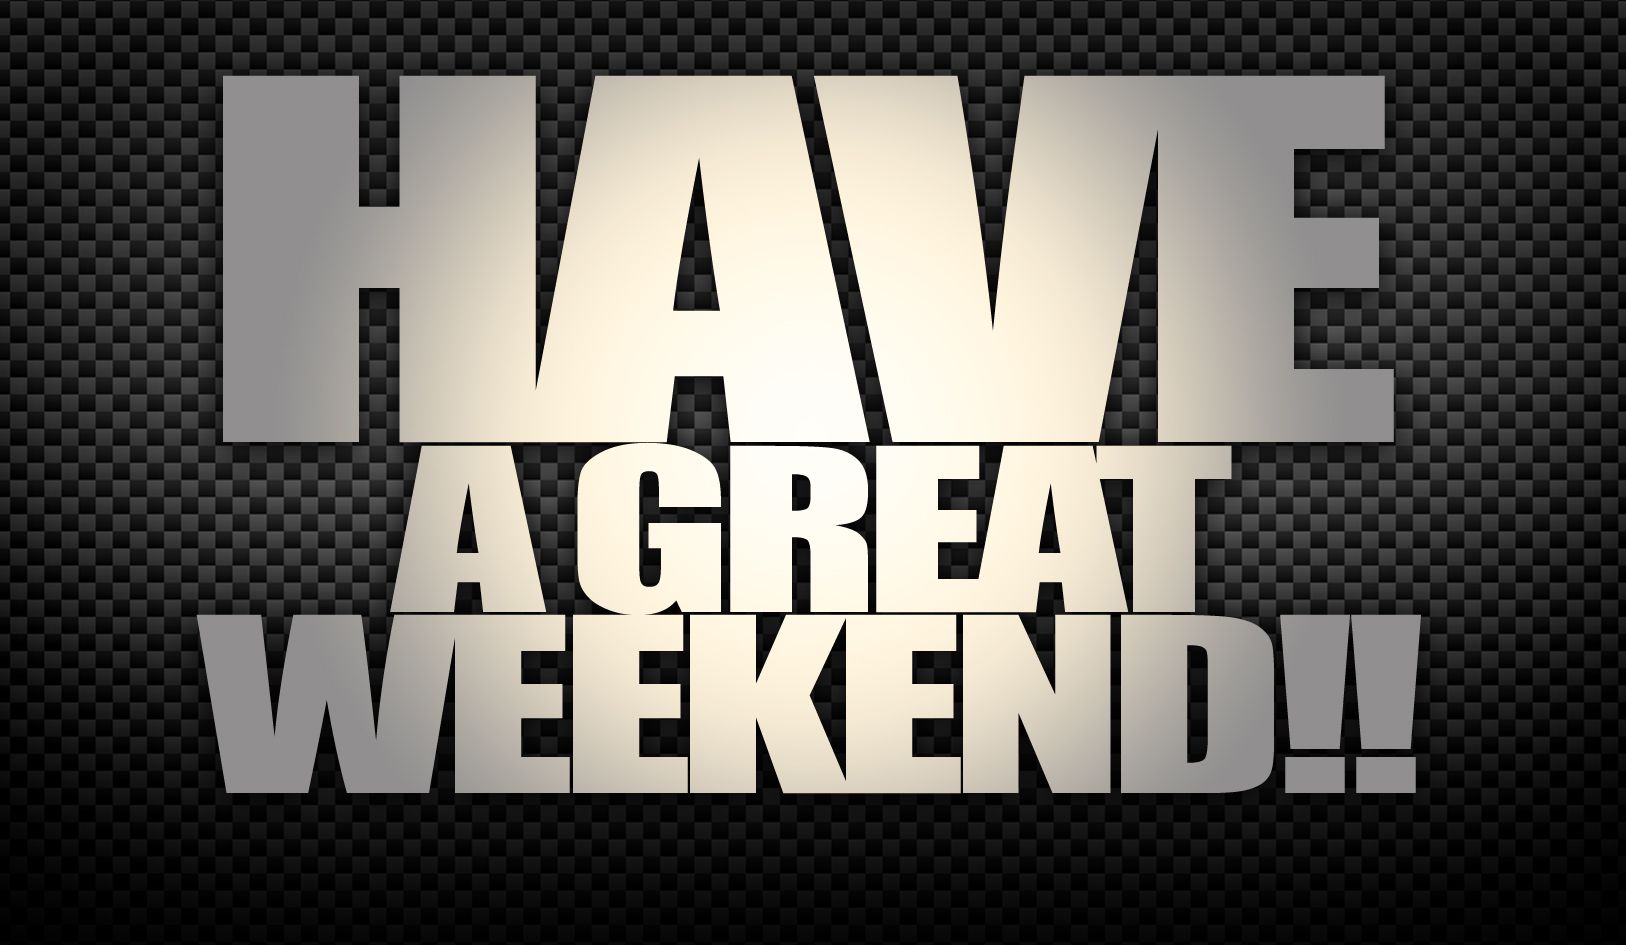 have-a-great-weekend-graphicdesignoftheday-uEra4E-clipart.jpg